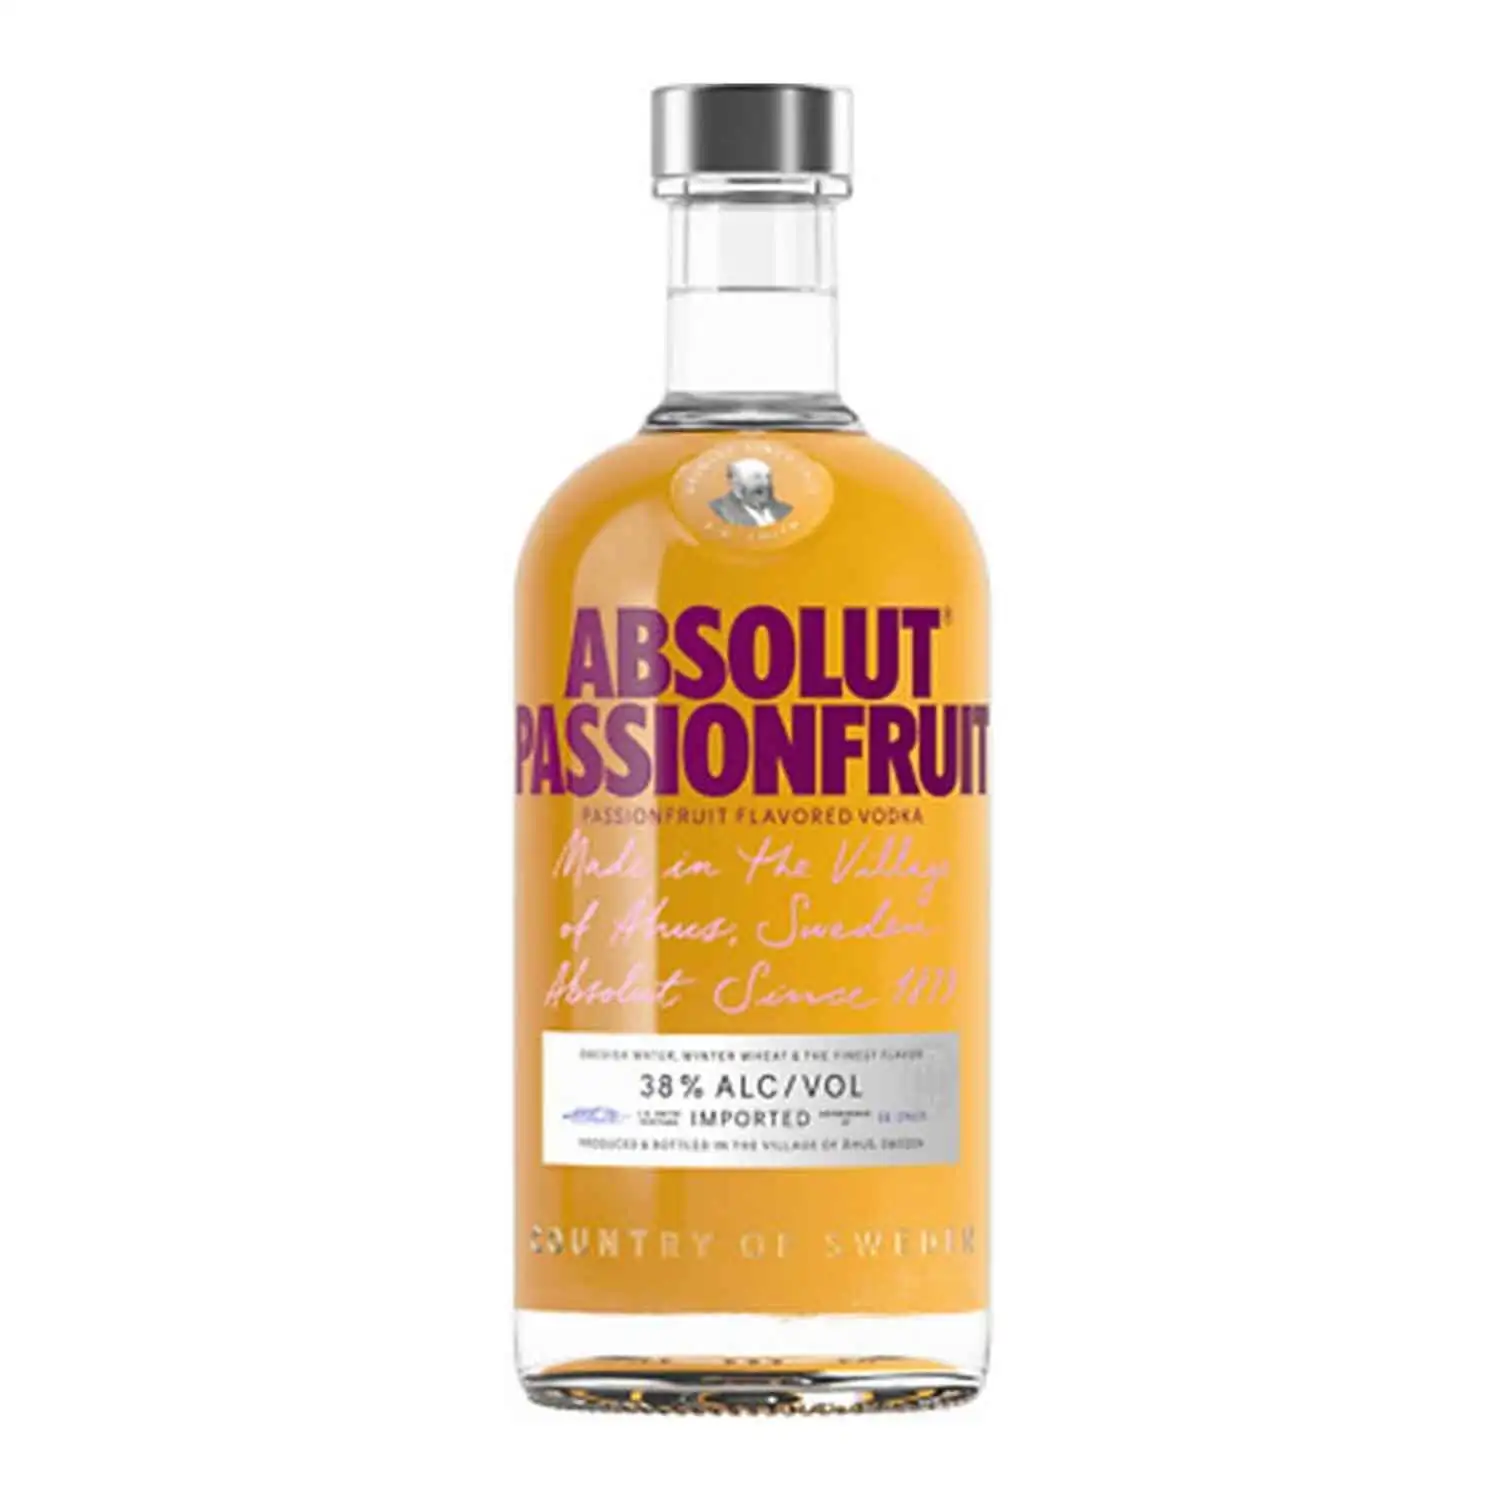 Absolut passionfruit 70cl Alc 38% - Buy at Real Tobacco